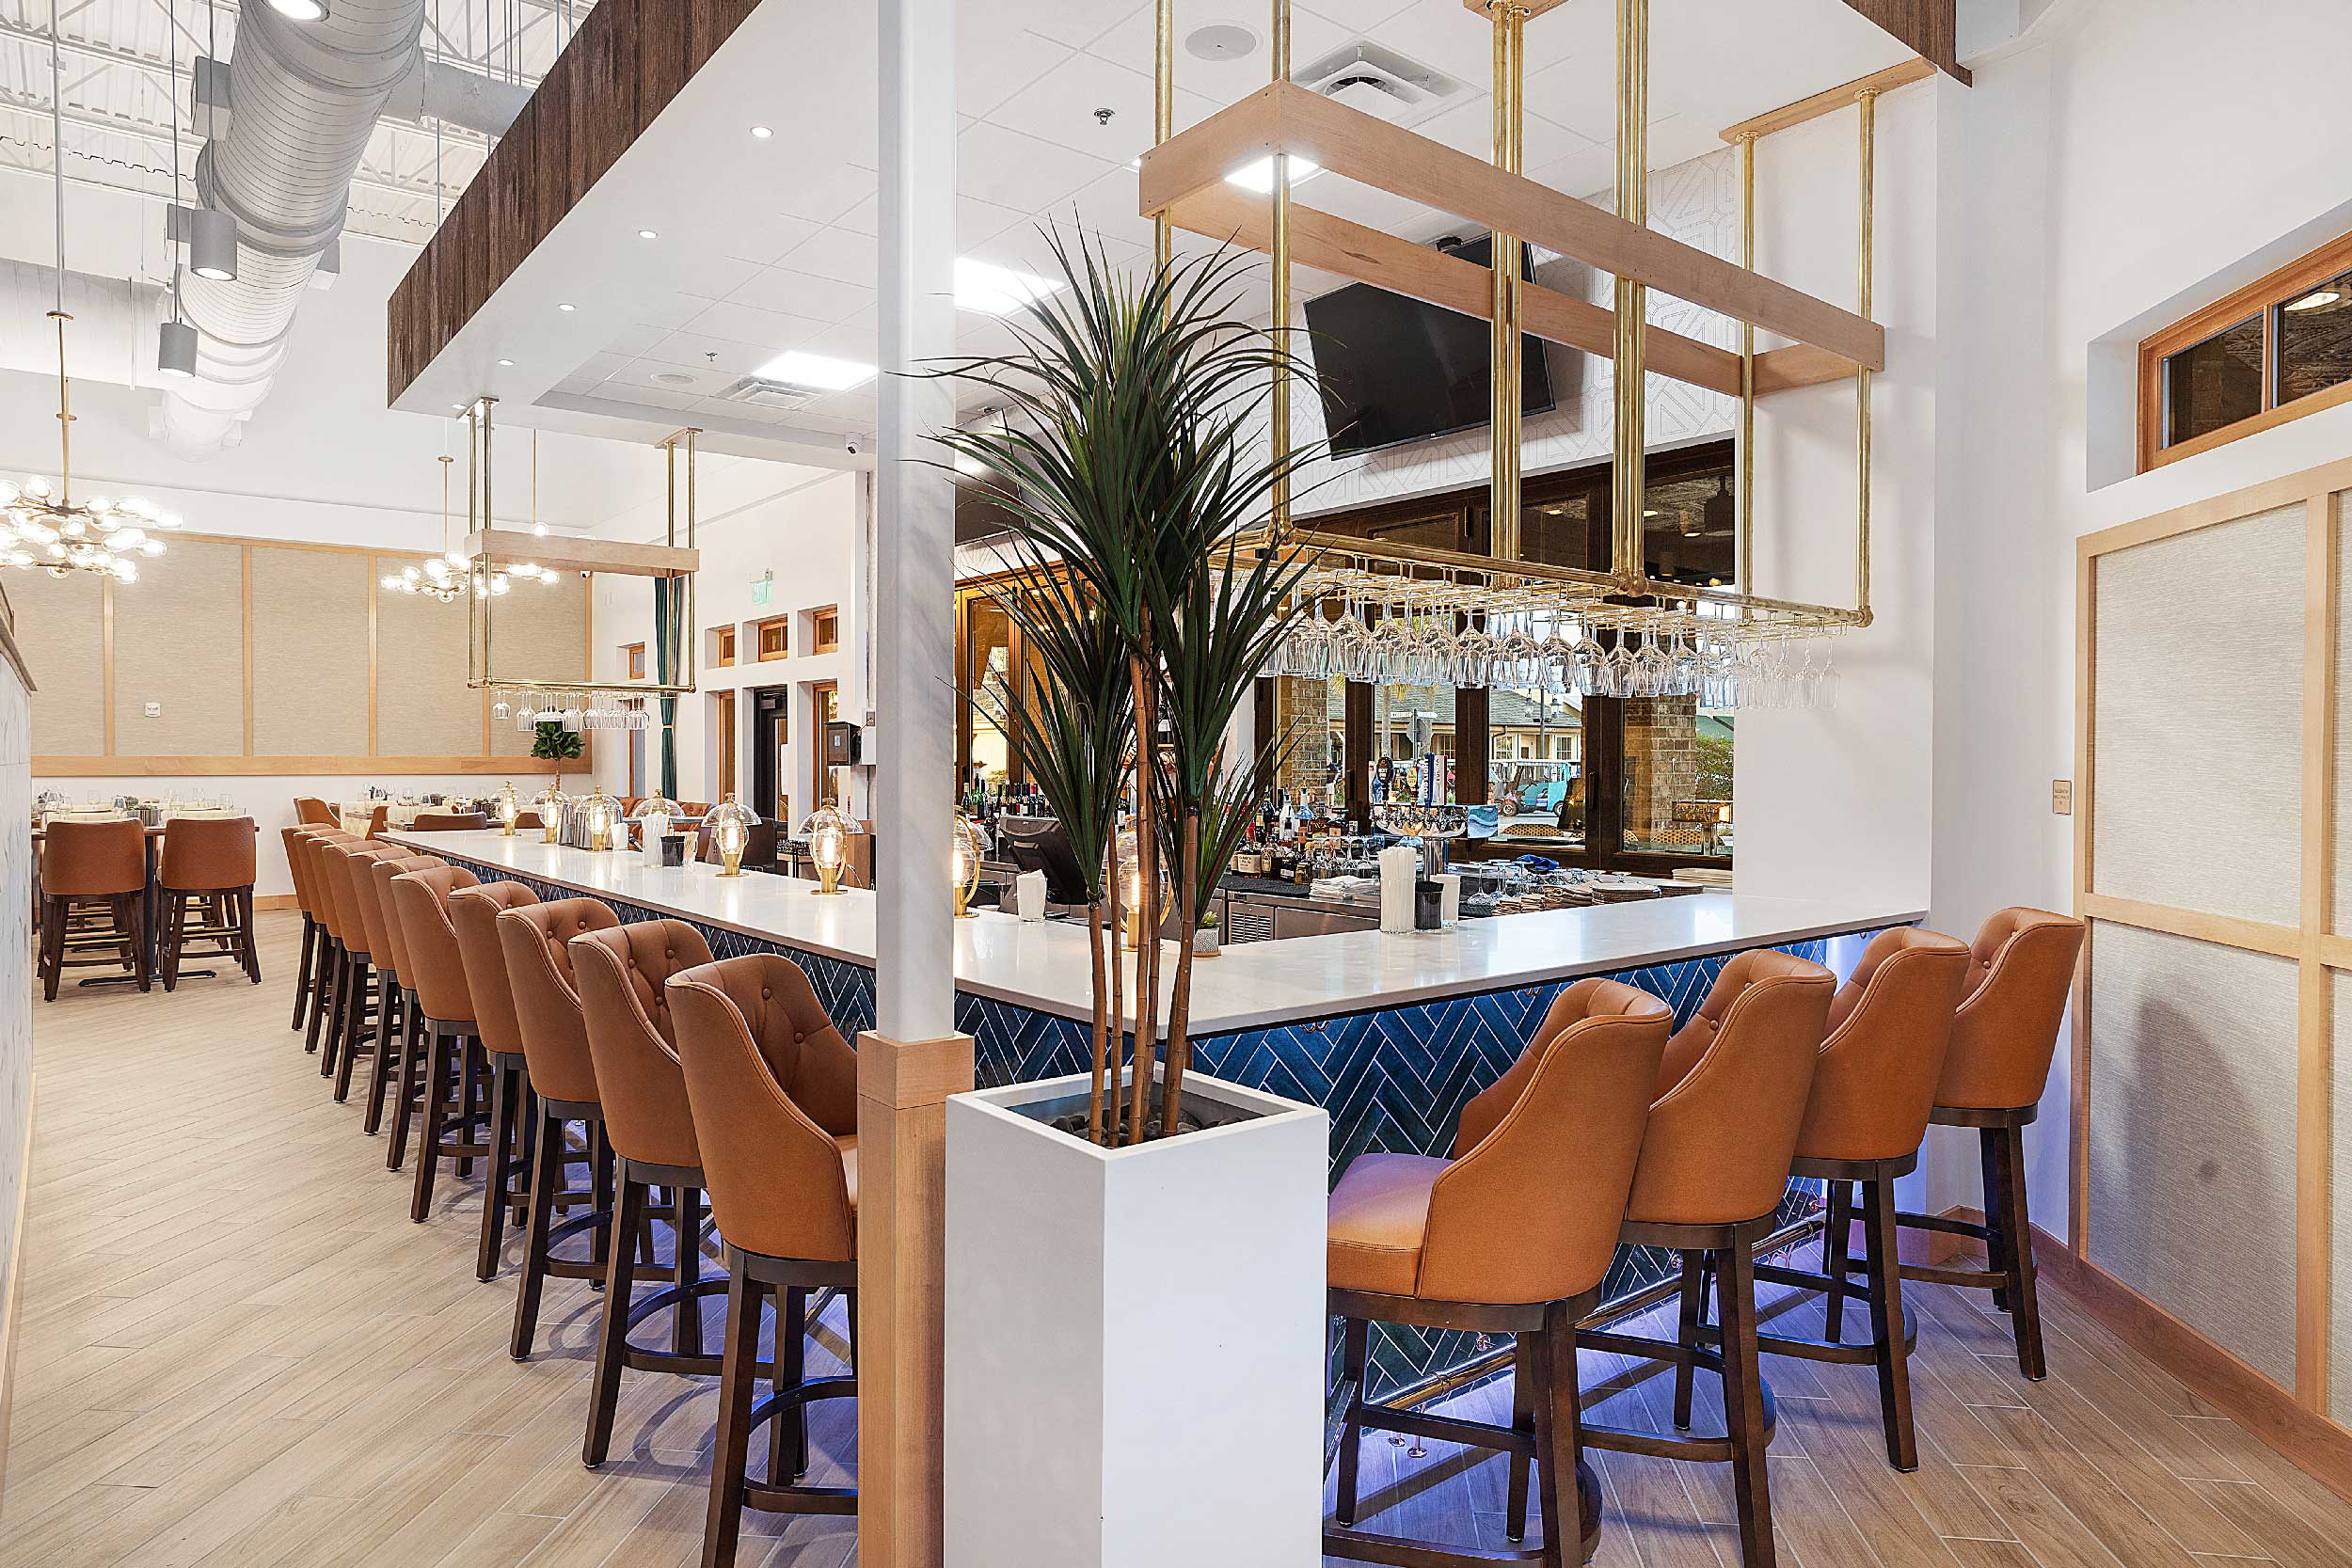 Harvest Restaurant bar area with angled terra cotta-colored bar stools